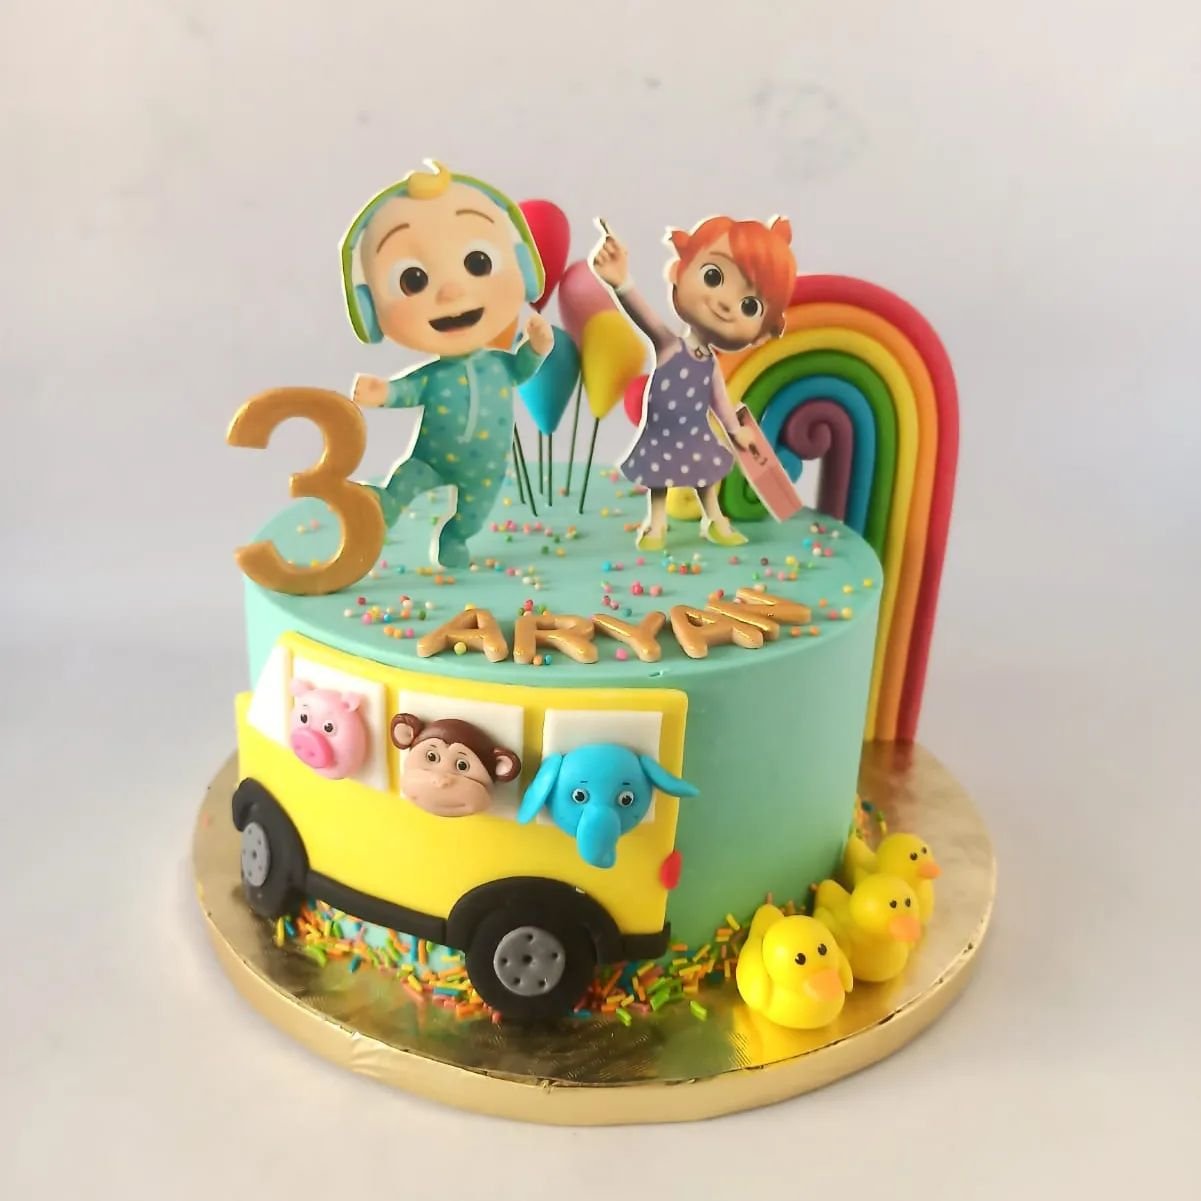 Cocomelon themed cake

[ rainbow , wheels on the bus cake, butter cream base, customized cakes bangalore]